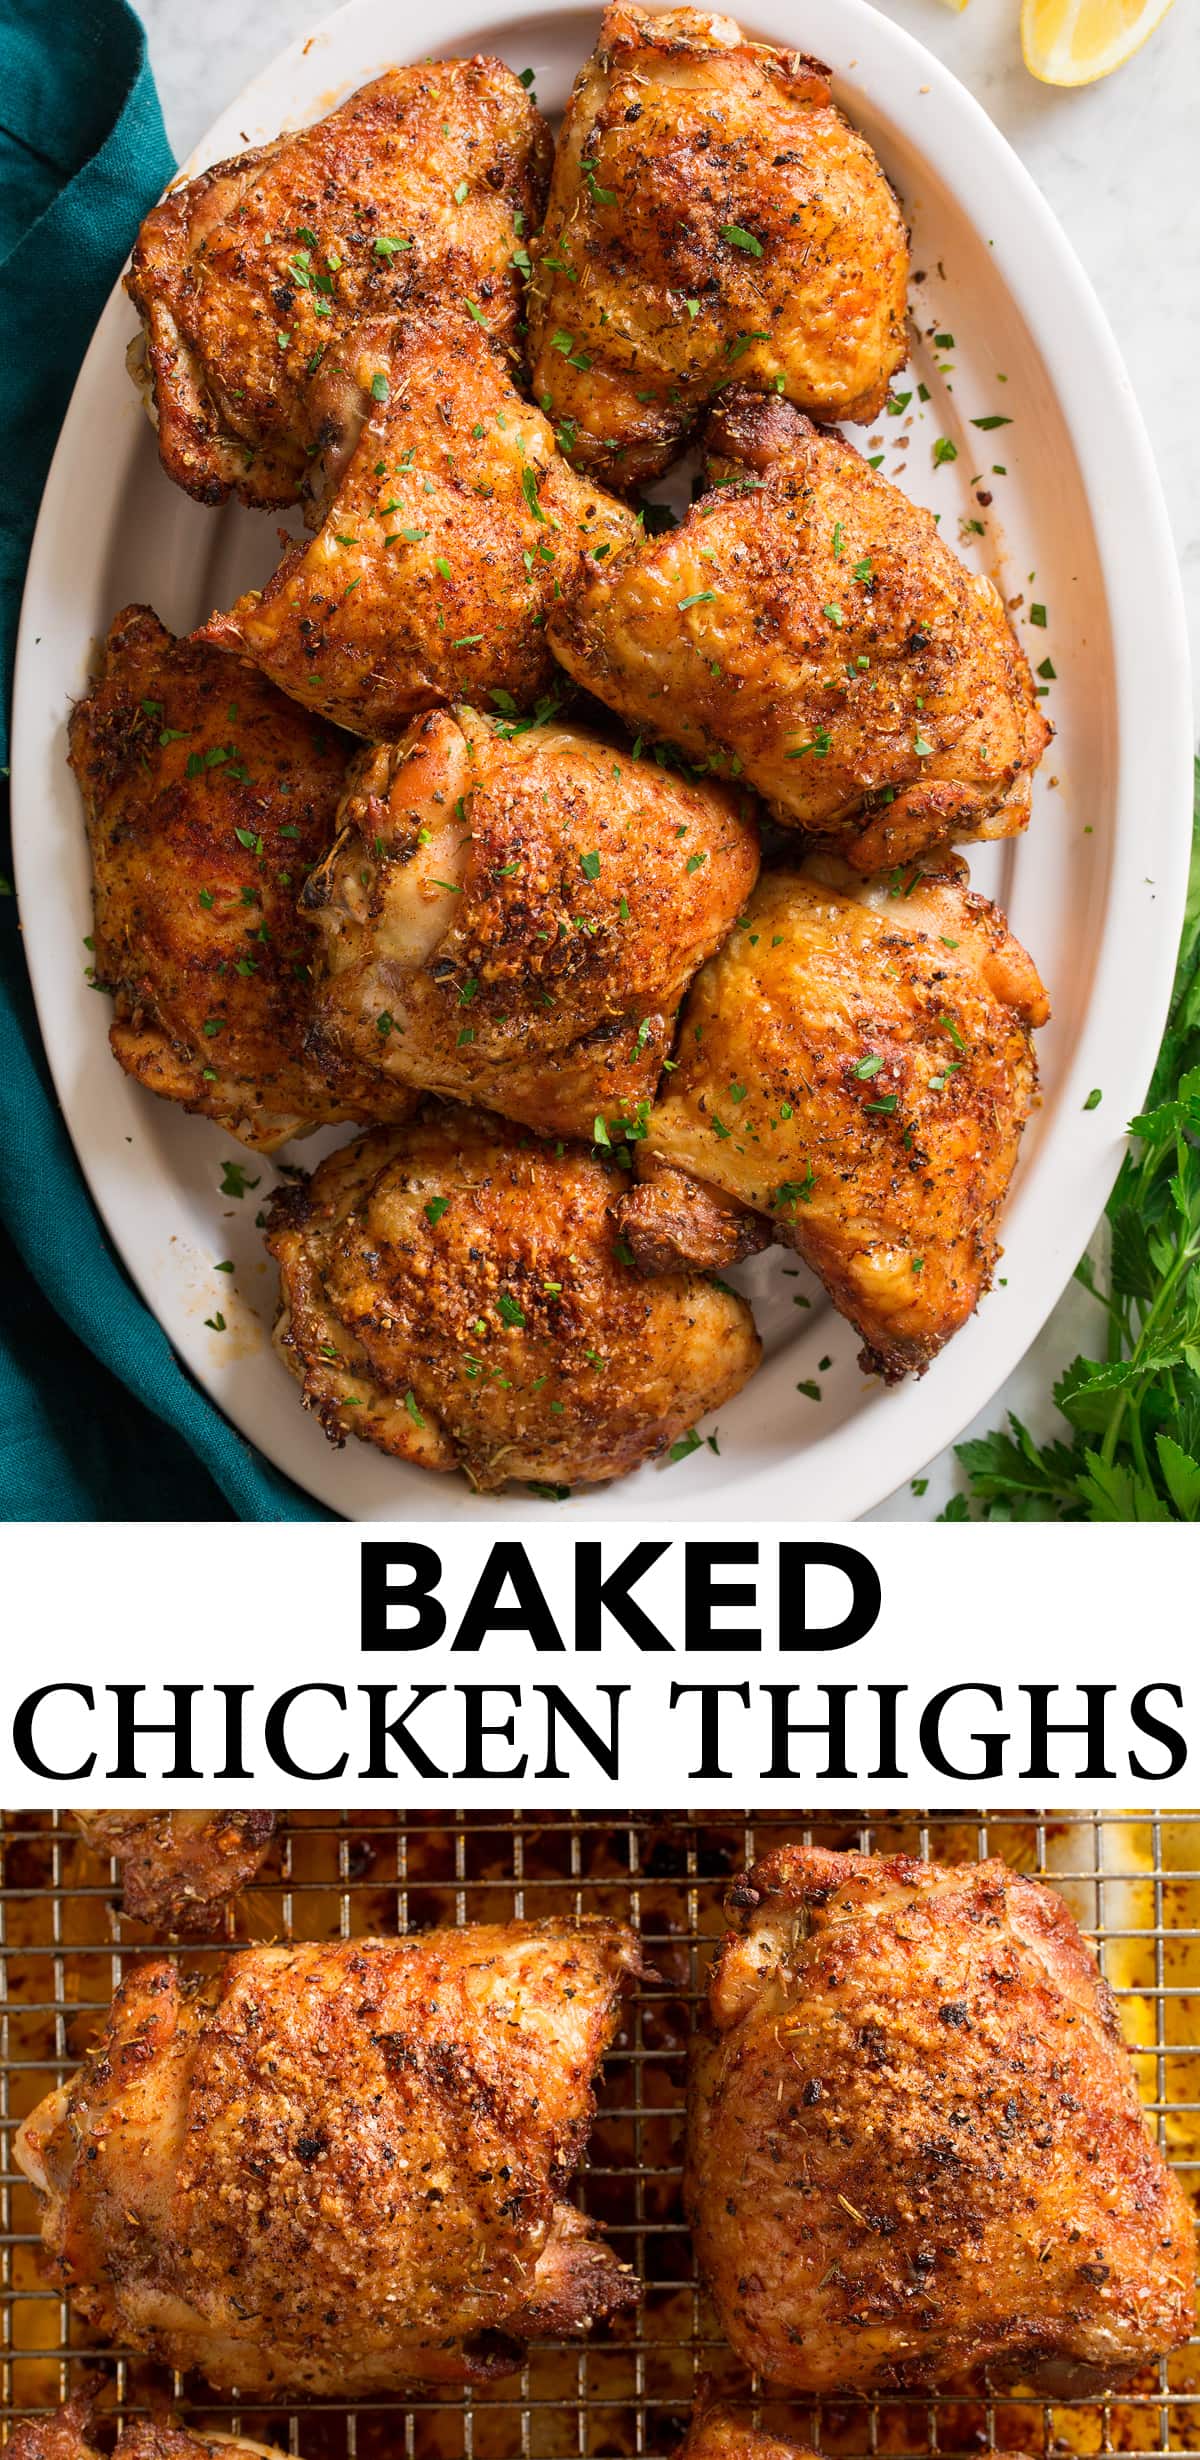 Baked Chicken Thighs - Cooking Classy